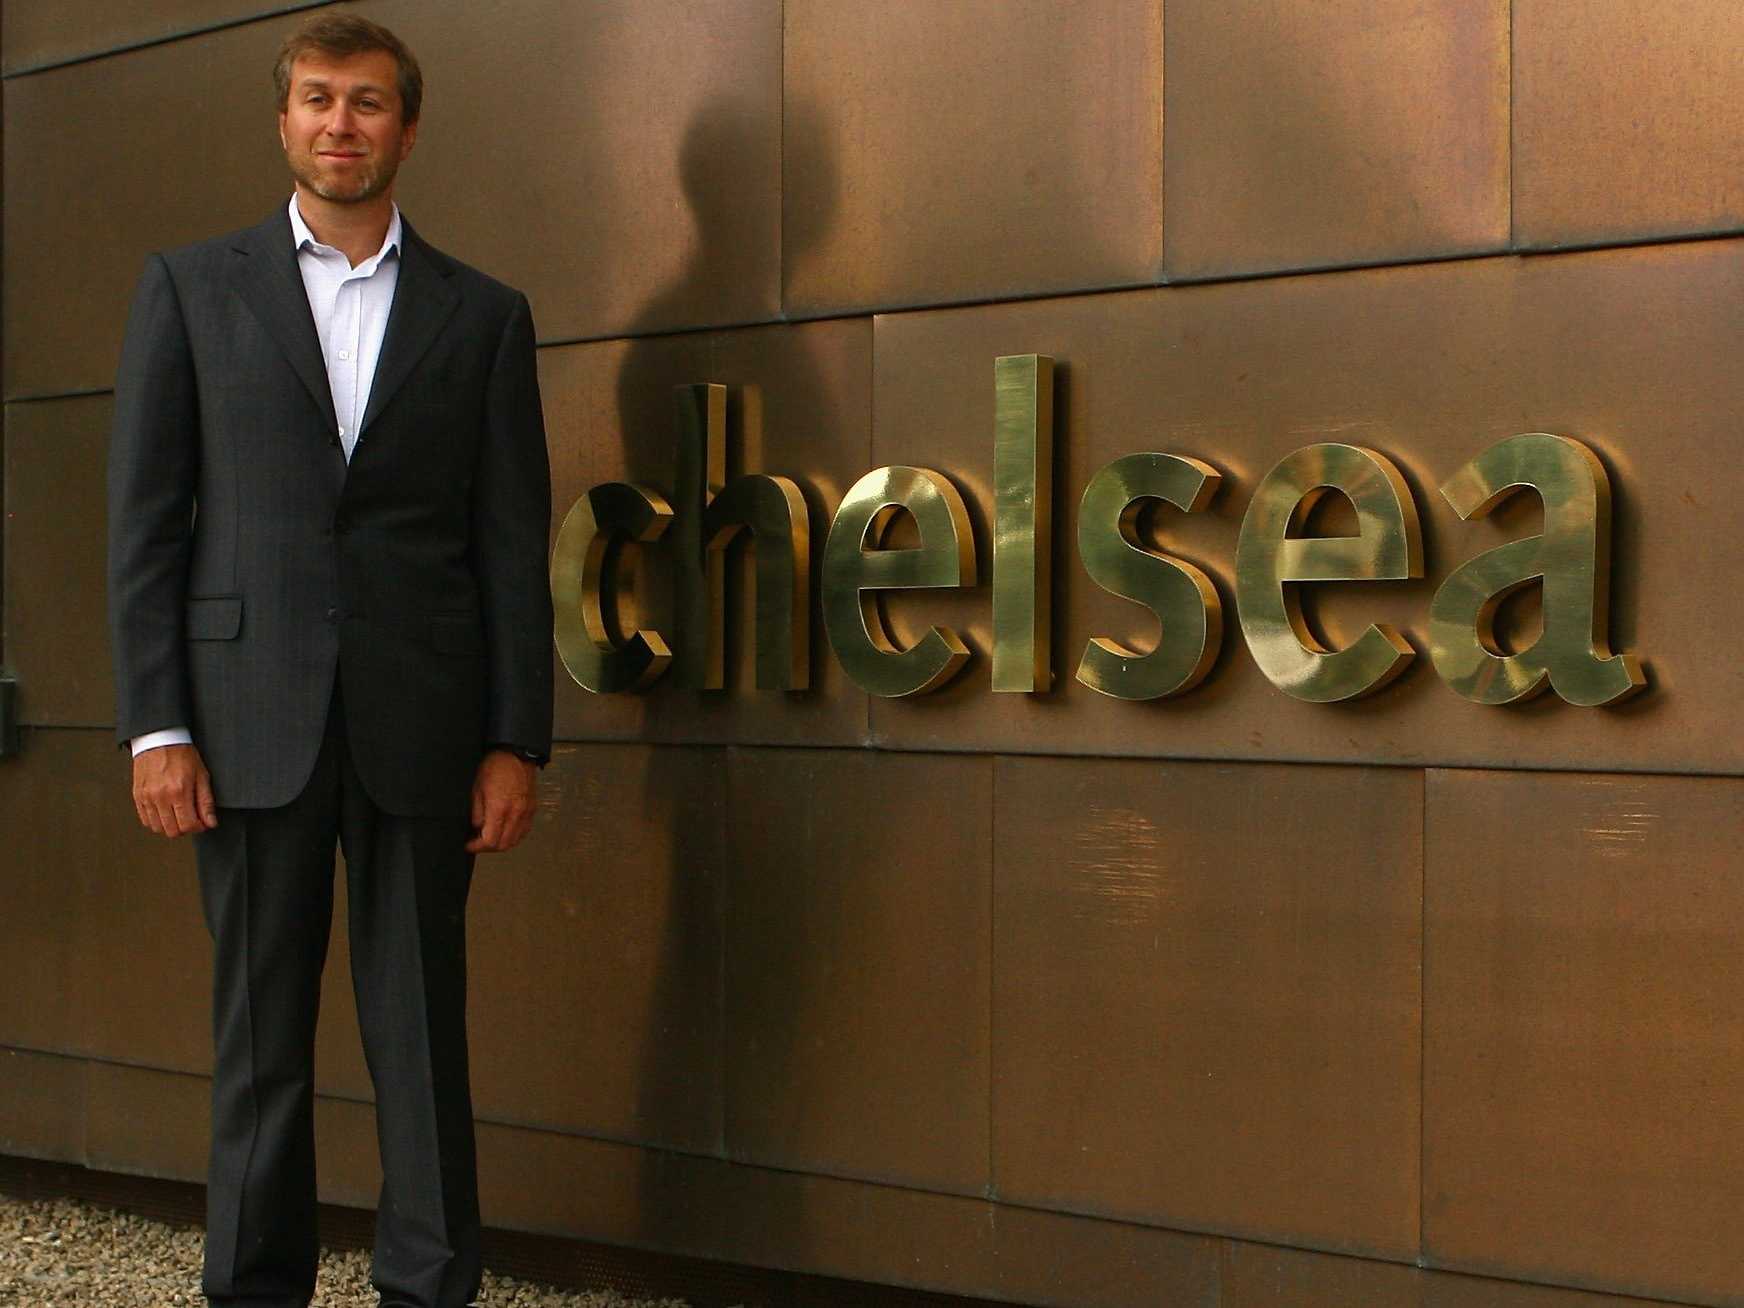 Chelsea may be forced to quit the Premier League and incur massive debt if the sale does not go through soon.